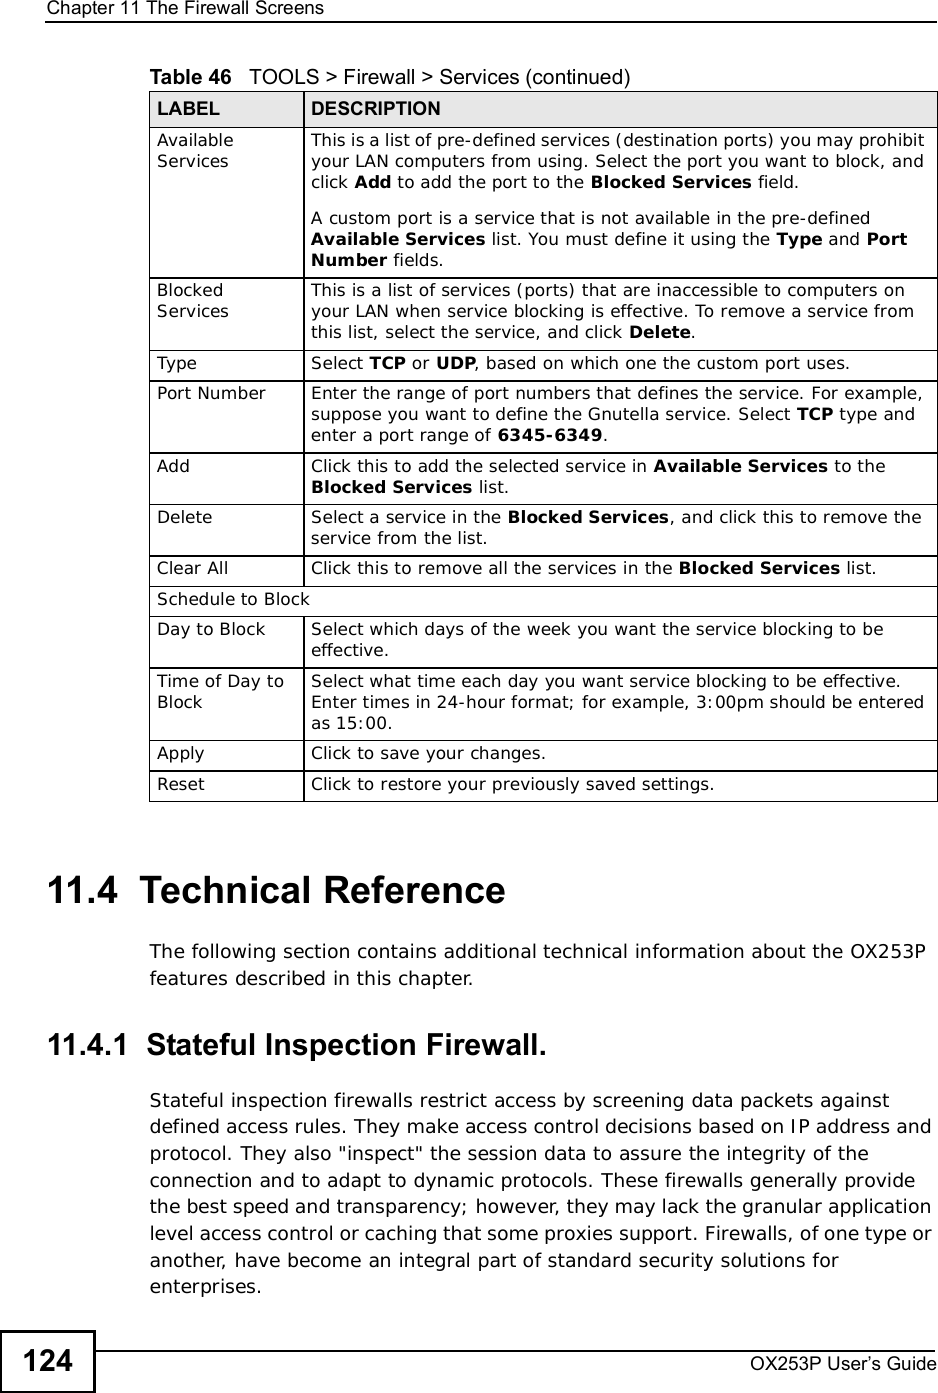 Chapter 11The Firewall ScreensOX253P User’s Guide12411.4  Technical ReferenceThe following section contains additional technical information about the OX253P features described in this chapter.11.4.1  Stateful Inspection Firewall.Stateful inspection firewalls restrict access by screening data packets against defined access rules. They make access control decisions based on IP address and protocol. They also &quot;inspect&quot; the session data to assure the integrity of the connection and to adapt to dynamic protocols. These firewalls generally provide the best speed and transparency; however, they may lack the granular application level access control or caching that some proxies support. Firewalls, of one type or another, have become an integral part of standard security solutions for enterprises.Available Services This is a list of pre-defined services (destination ports) you may prohibit your LAN computers from using. Select the port you want to block, and click Add to add the port to the Blocked Services field.A custom port is a service that is not available in the pre-defined Available Services list. You must define it using the Type and PortNumber fields.Blocked Services This is a list of services (ports) that are inaccessible to computers on your LAN when service blocking is effective. To remove a service from this list, select the service, and click Delete.Type Select TCP or UDP, based on which one the custom port uses.Port Number Enter the range of port numbers that defines the service. For example, suppose you want to define the Gnutella service. Select TCP type and enter a port range of 6345-6349.Add Click this to add the selected service in Available Services to the Blocked Services list.Delete Select a service in the Blocked Services, and click this to remove the service from the list.Clear All Click this to remove all the services in the Blocked Services list.Schedule to BlockDay to Block Select which days of the week you want the service blocking to be effective.Time of Day to Block Select what time each day you want service blocking to be effective. Enter times in 24-hour format; for example, 3:00pm should be entered as 15:00.Apply Click to save your changes.Reset Click to restore your previously saved settings.Table 46   TOOLS &gt; Firewall &gt; Services (continued)LABEL DESCRIPTION